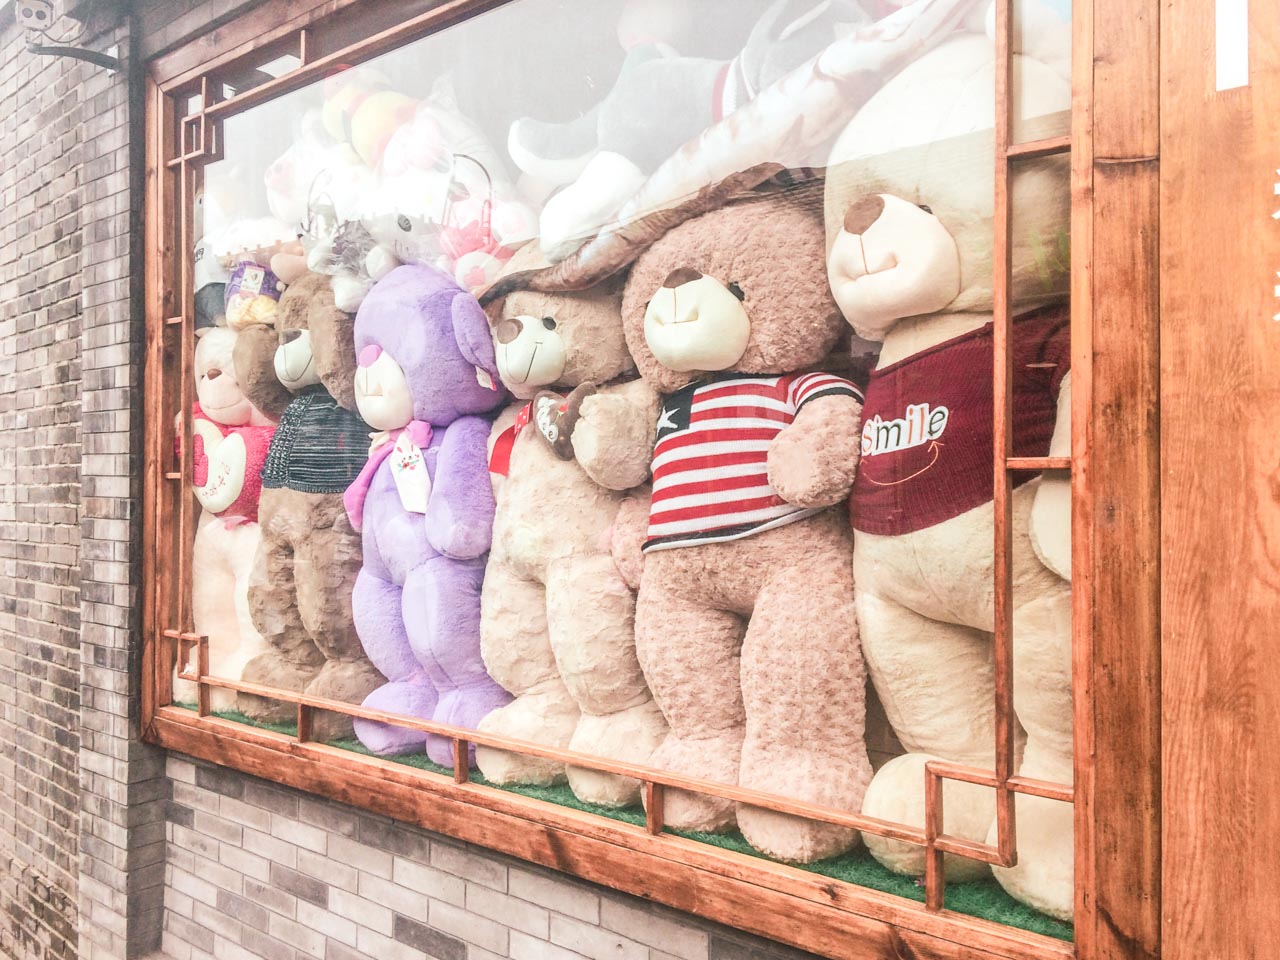 Window display at a shop in Beijing, China completely covered with big teddy bears